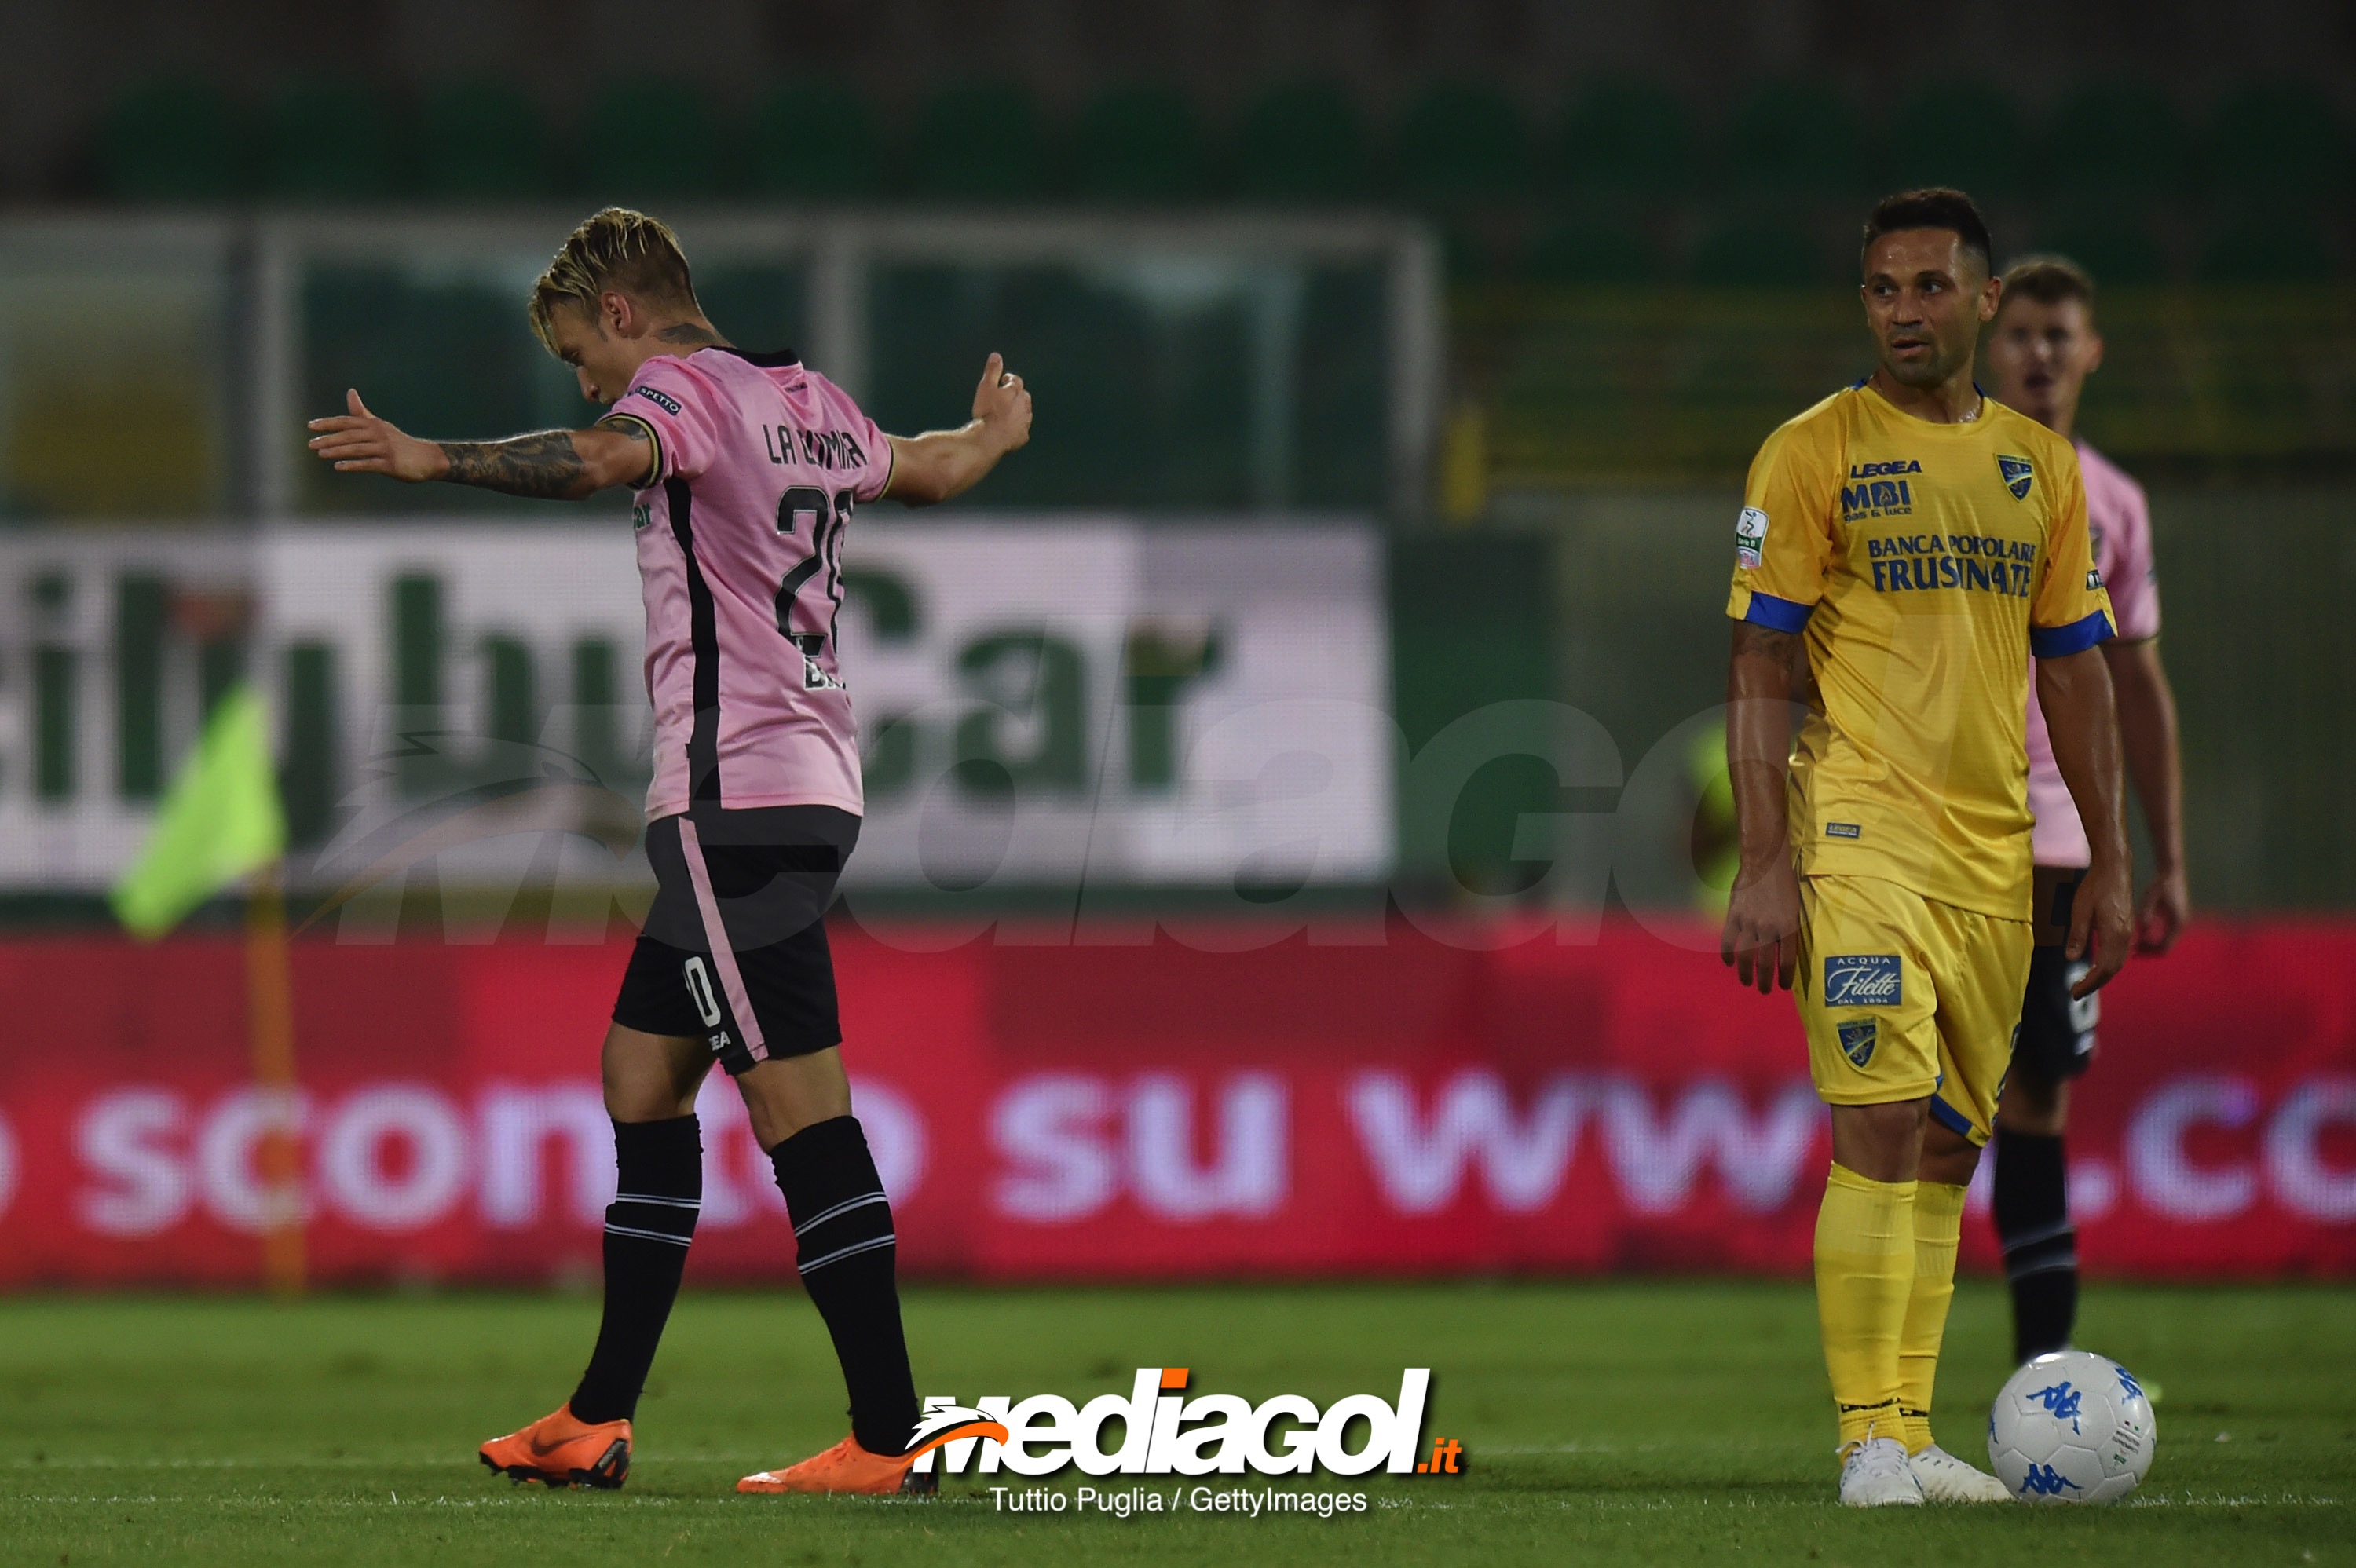 PALERMO, ITALY - JUNE 13:  Antonino La Gumina of Palermo celebrates after scoring the equalizing goal during the serie B playoff match final between US Citta di Palermo and Frosinone Calcio at Stadio Renzo Barbera on June 13, 2018 in Palermo, Italy.  (Photo by Tullio M. Puglia/Getty Images)